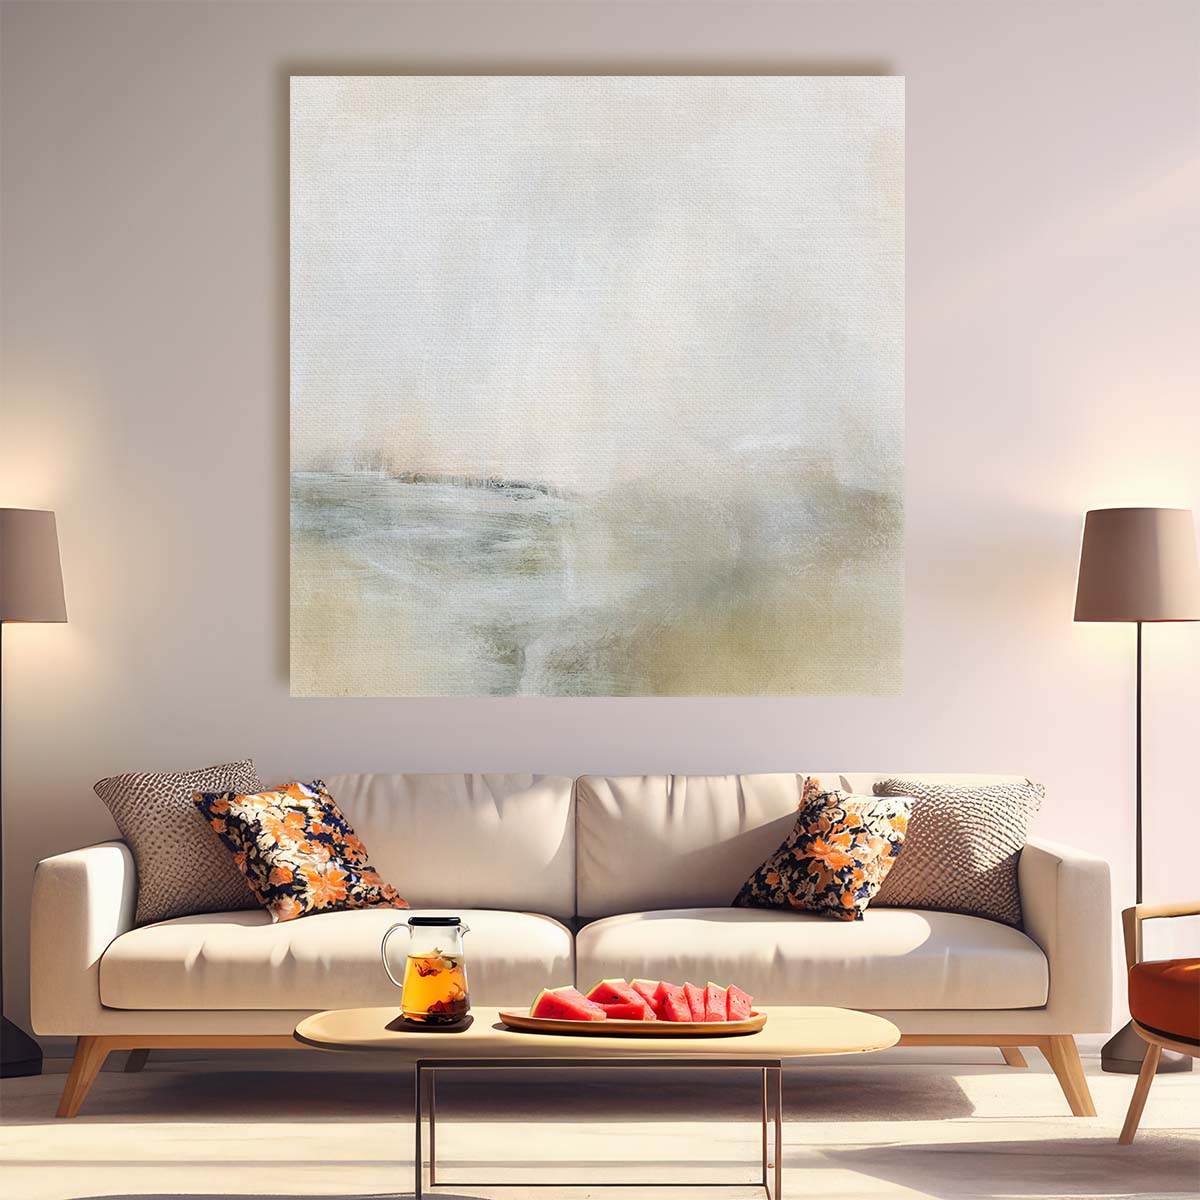 Abstract Golden Landscape Acrylic & Oil Wall Art by Luxuriance Designs. Made in USA.